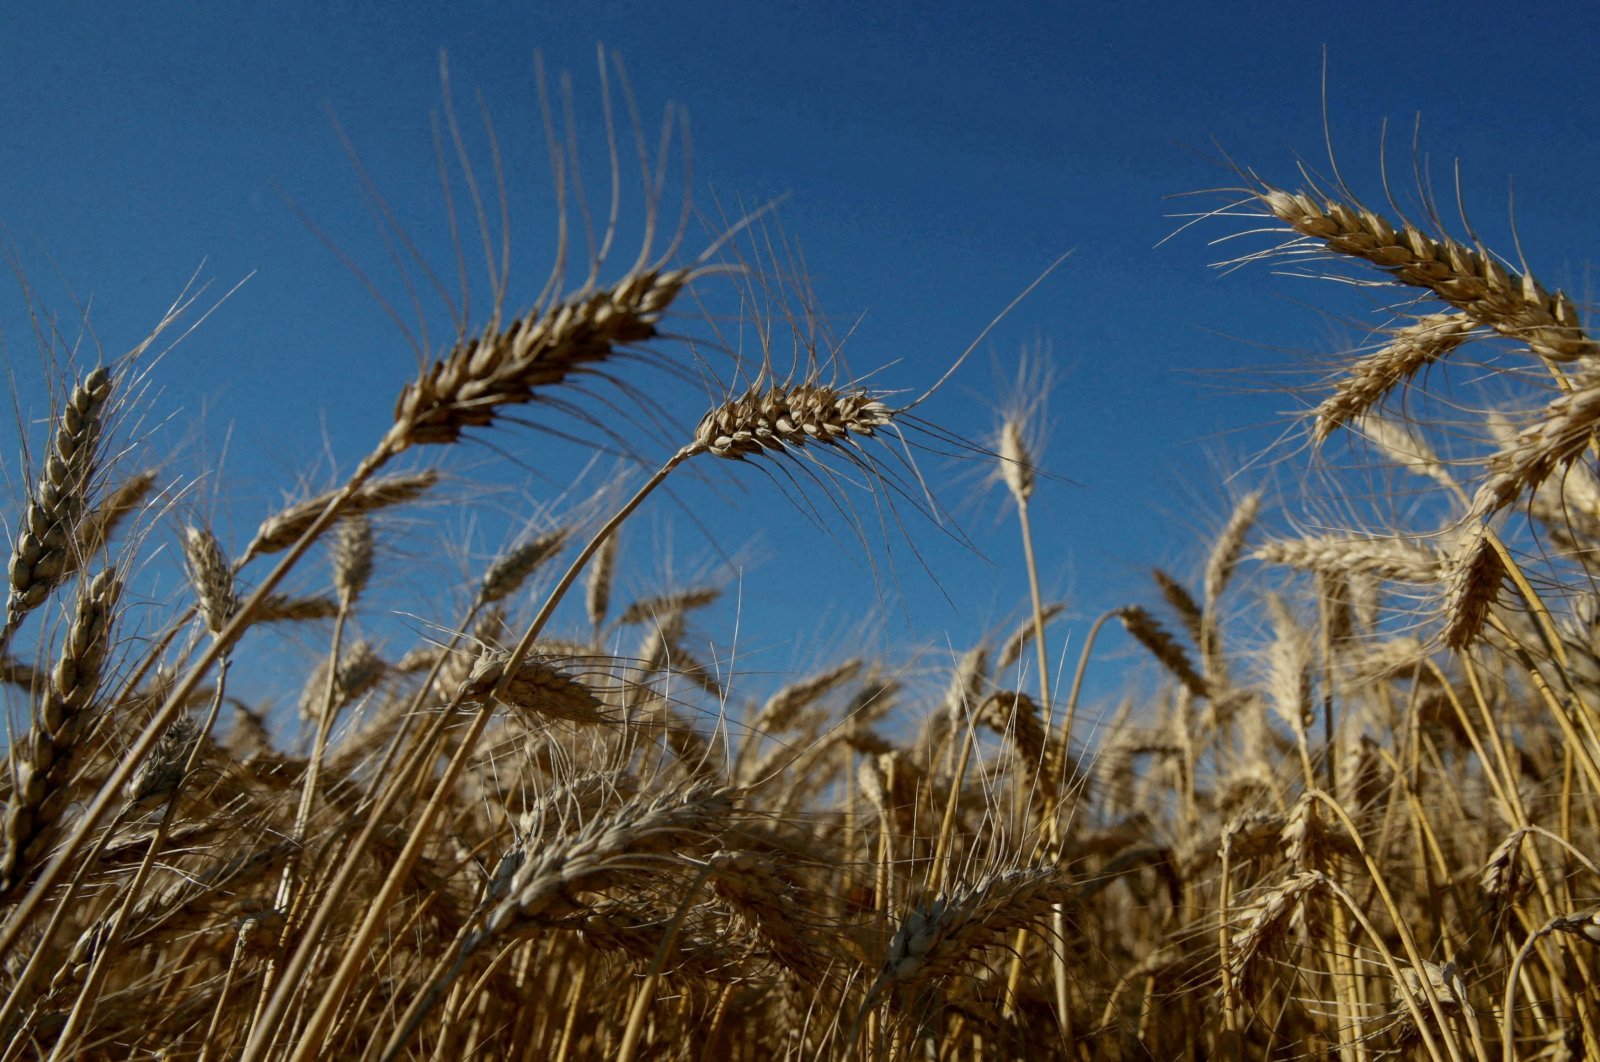 Ears of wheat are seen in a field near the village of Zhovtneve, Ukraine, July 14, 2016. (Reuters File Photo)